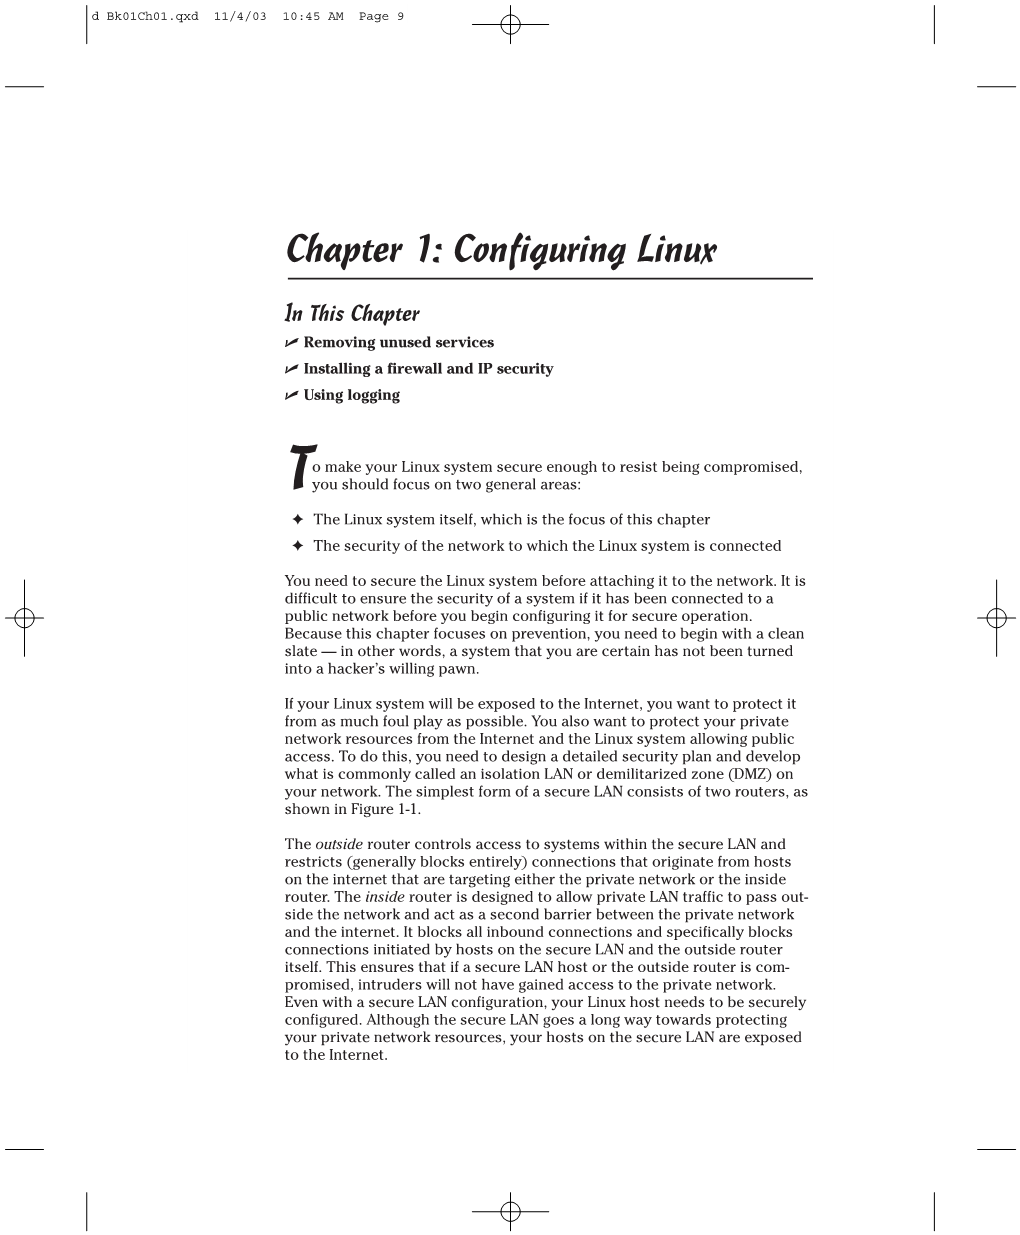 Chapter 1: Configuring Linux